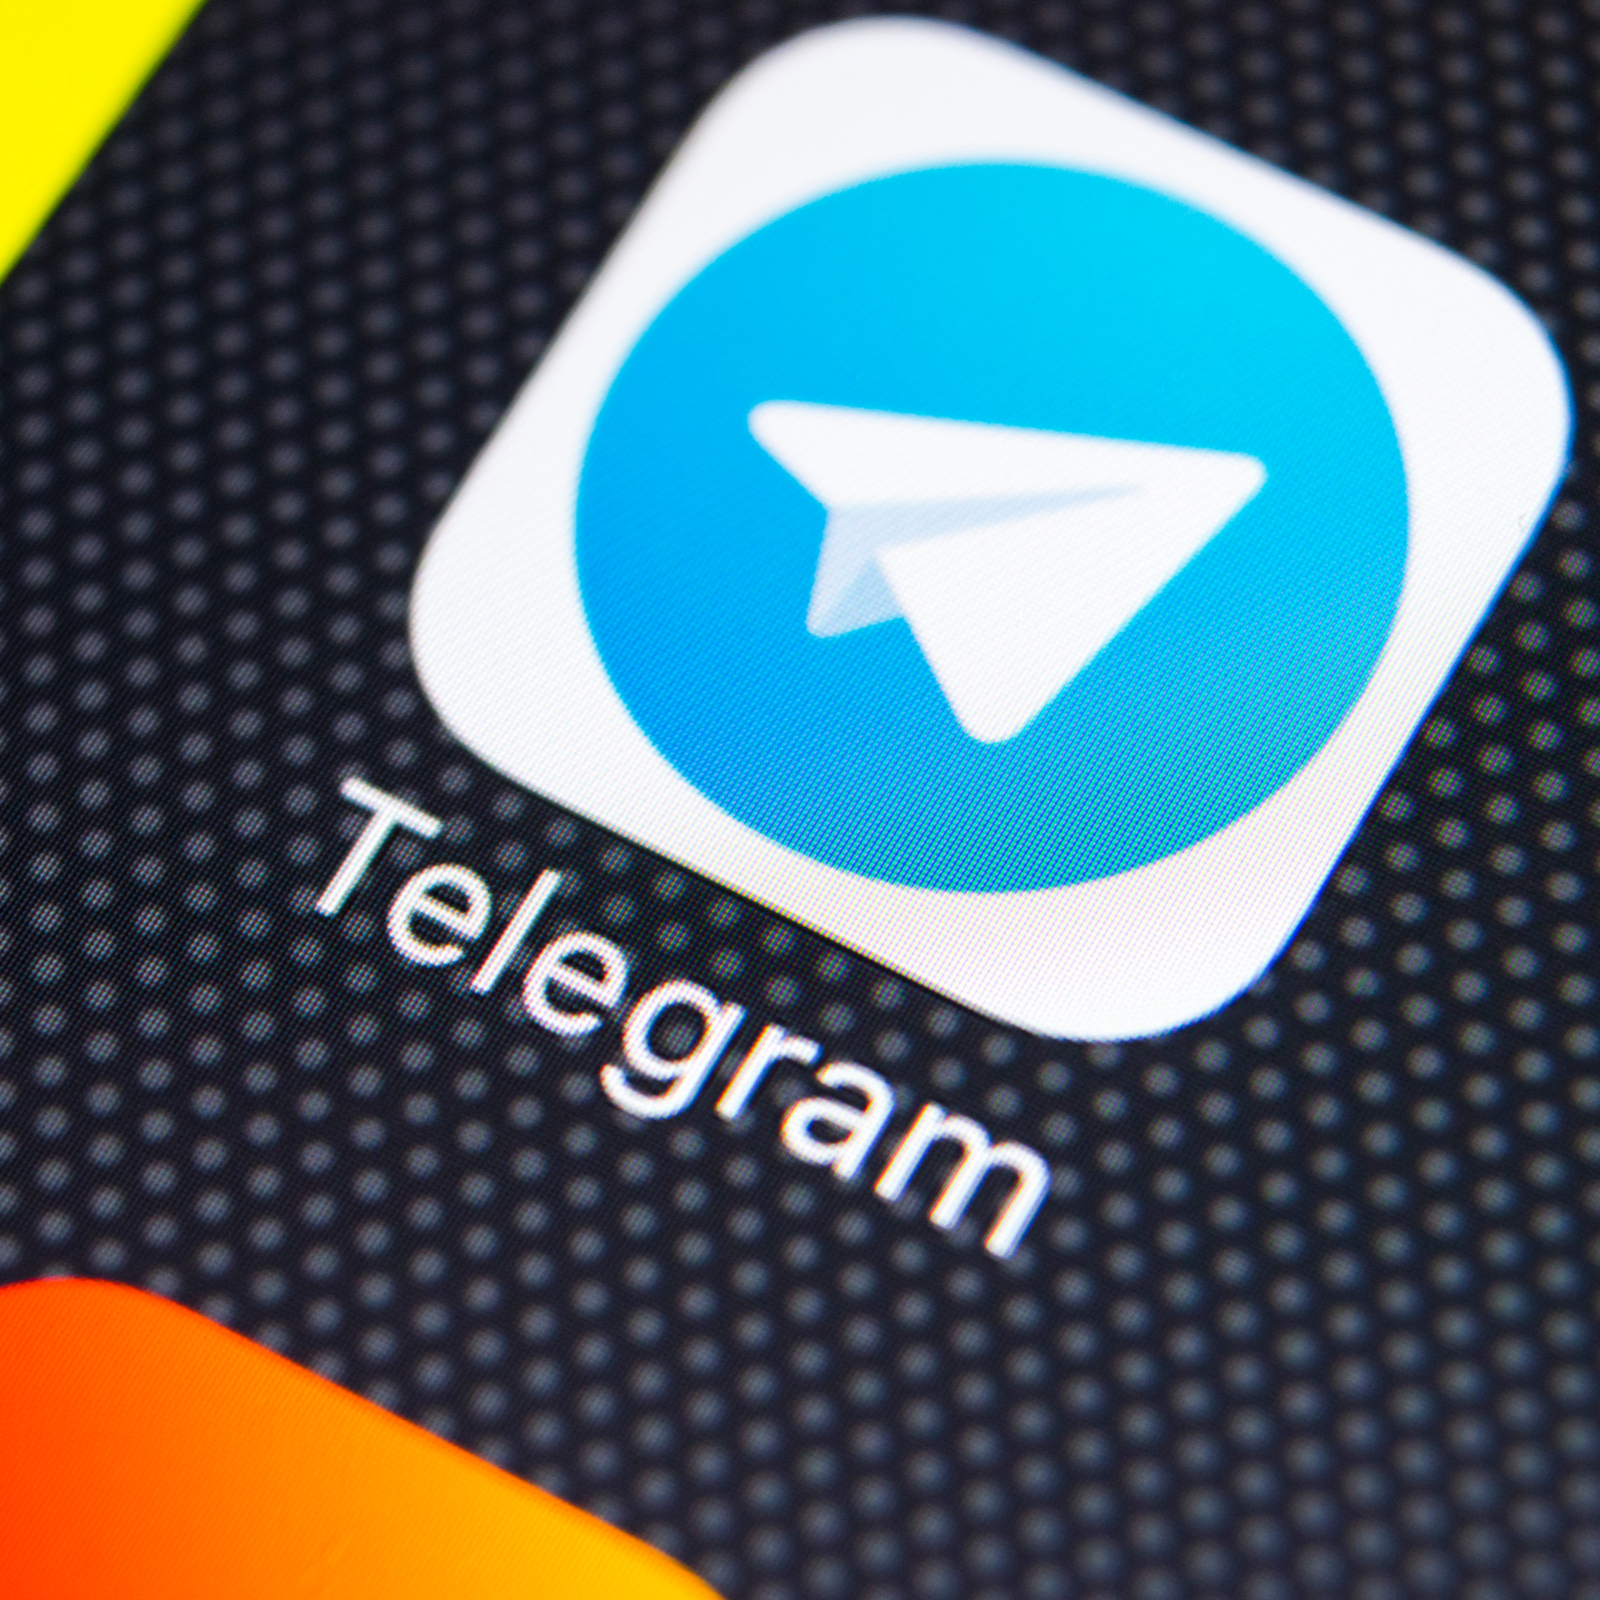 Iranian Official Issue Contradictory Statements Regarding Telegram Ban